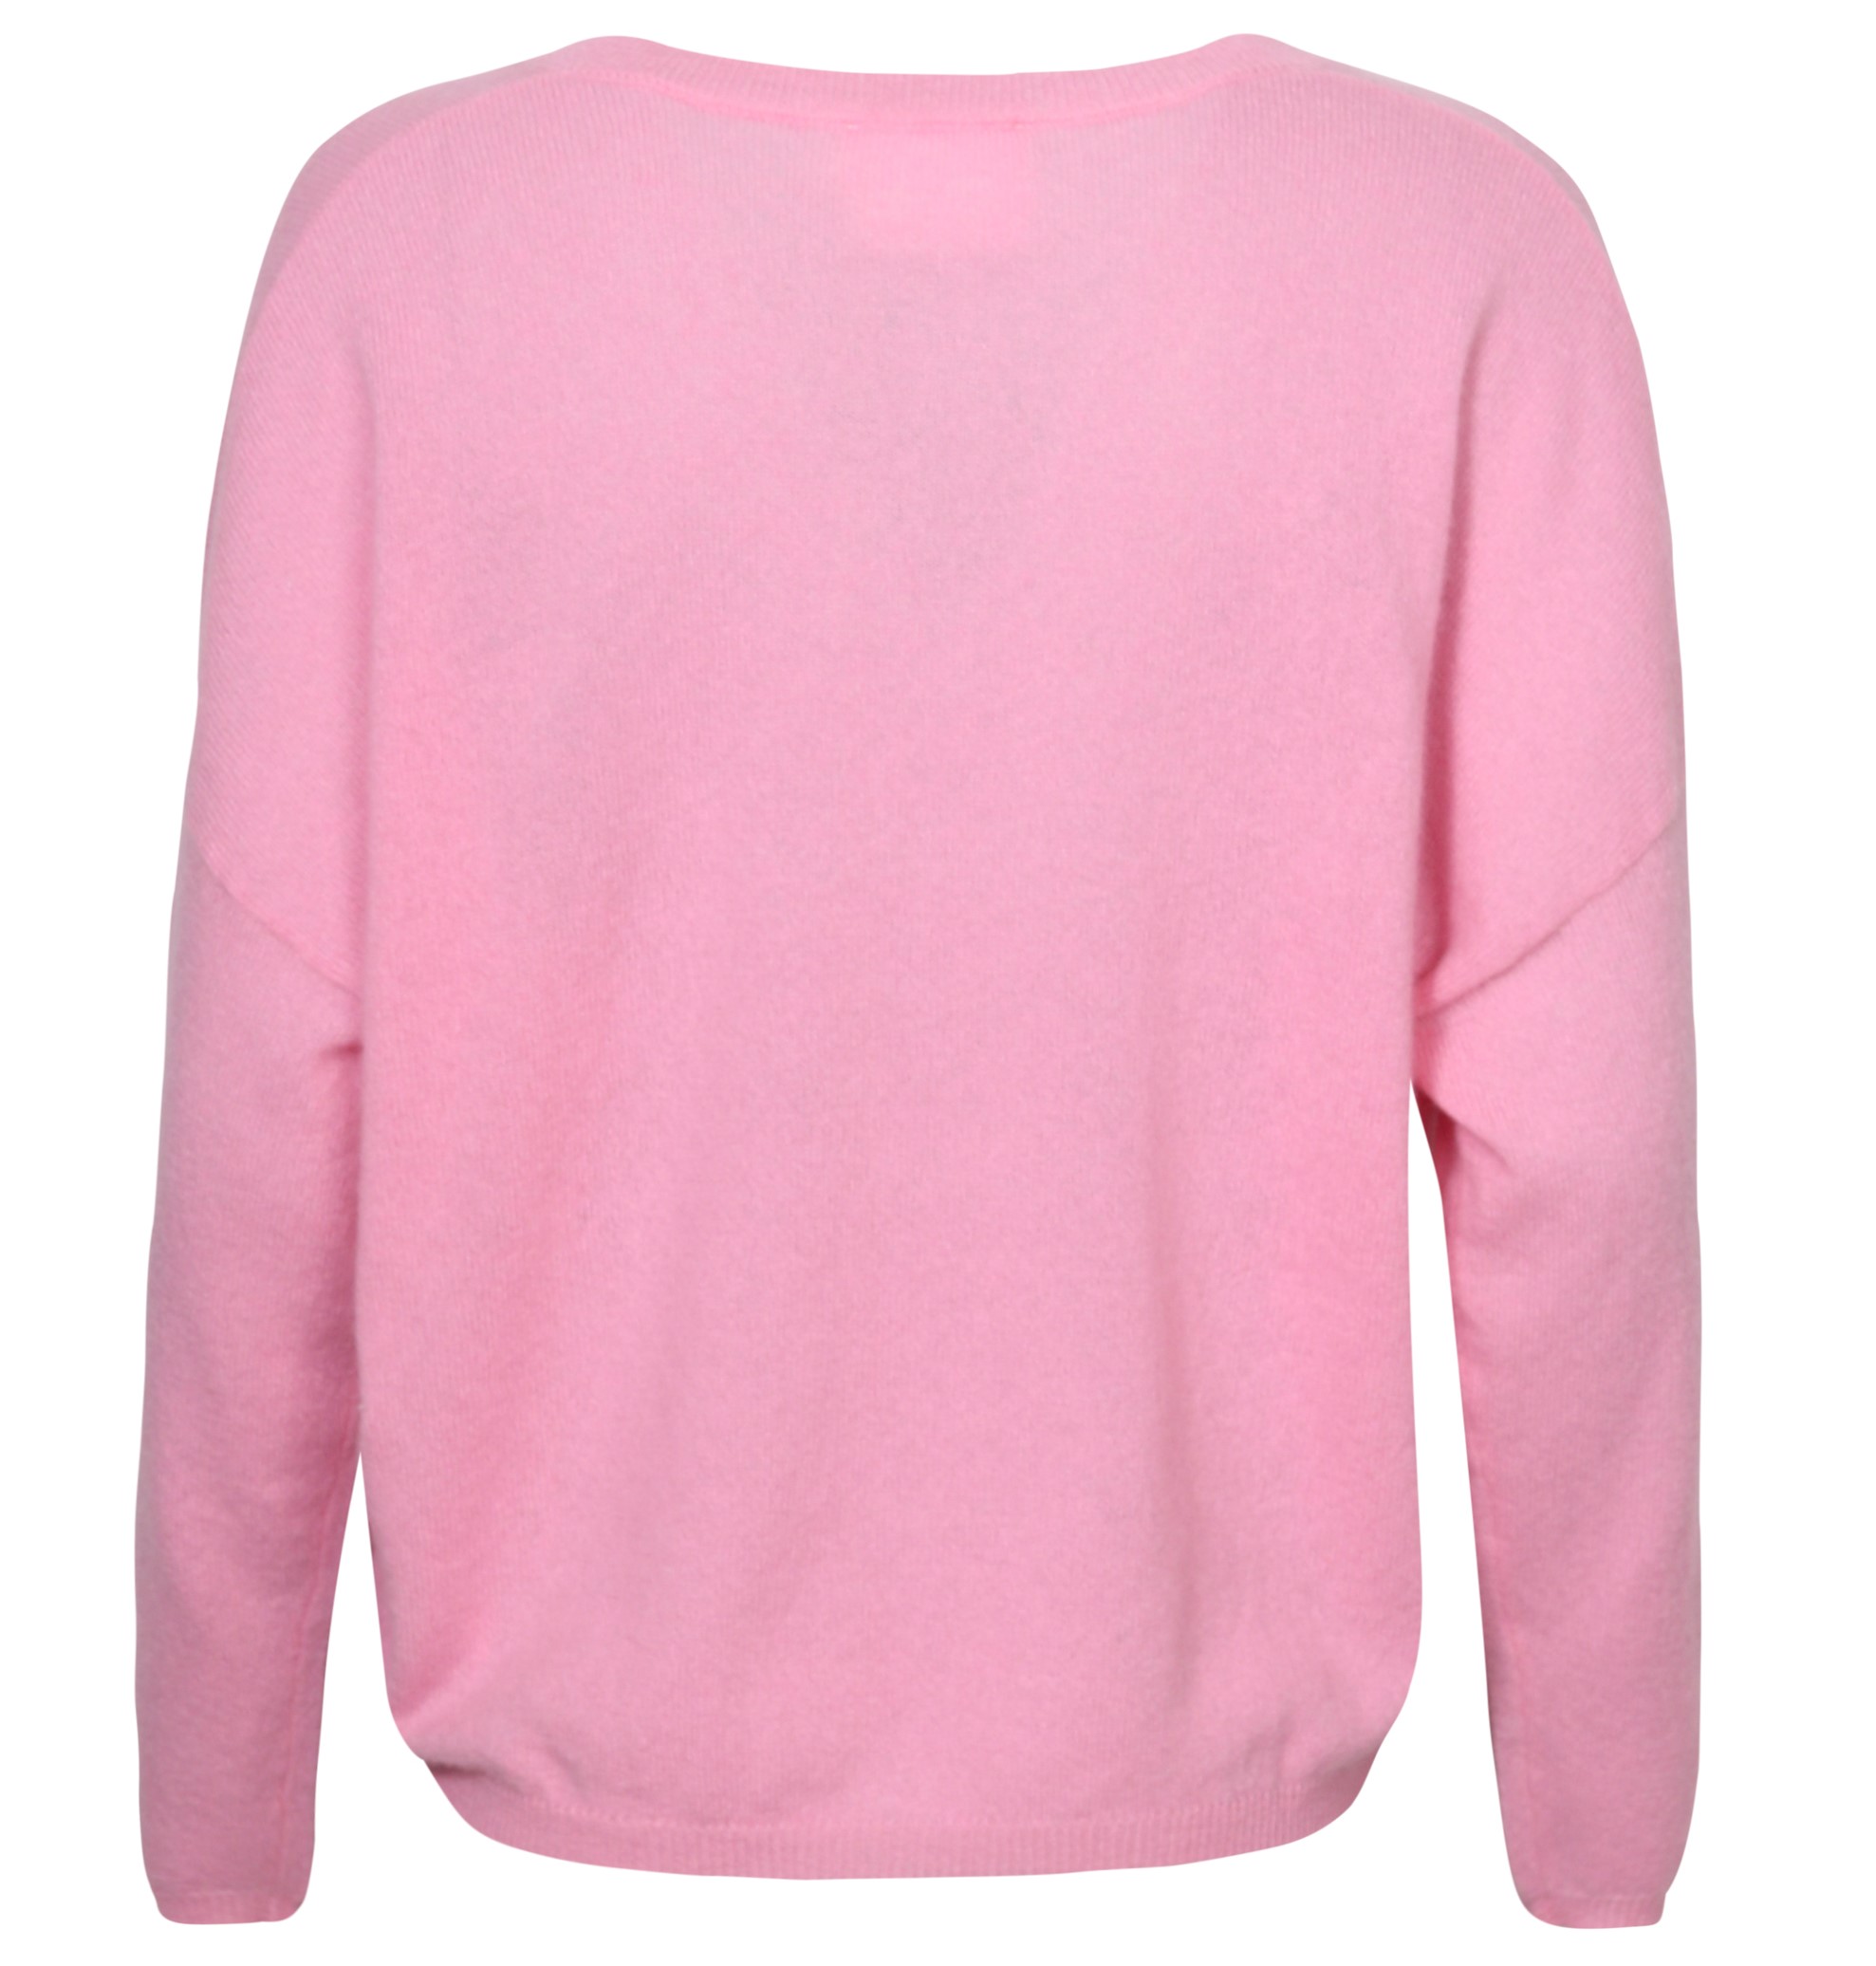 ABSOLUT CASHMERE V-Neck Sweater Alicia in Light Pink XS